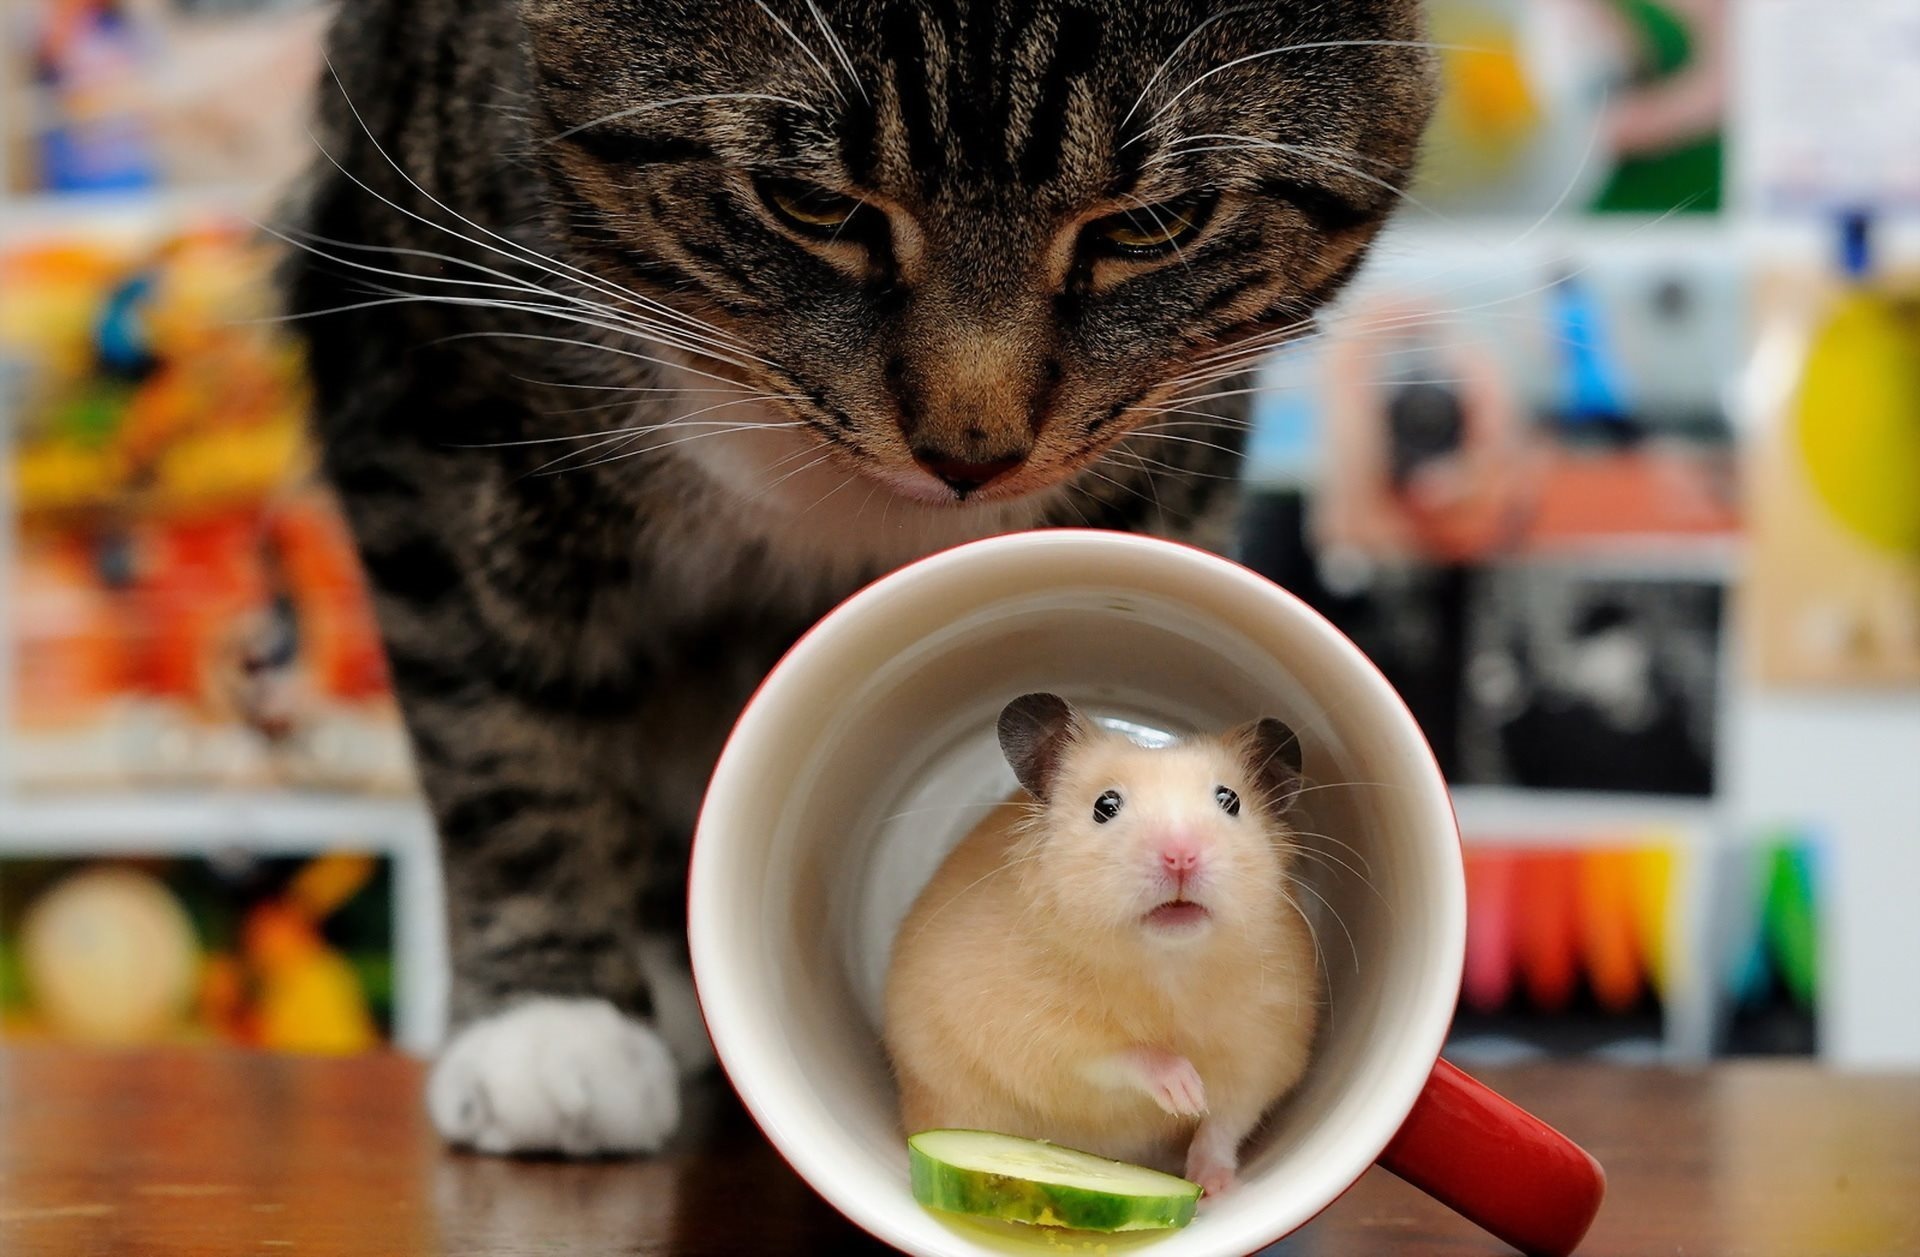 Mug cat and hamster, Desktop wallpapers, High-quality pictures, Animal rodent, 1920x1260 HD Desktop